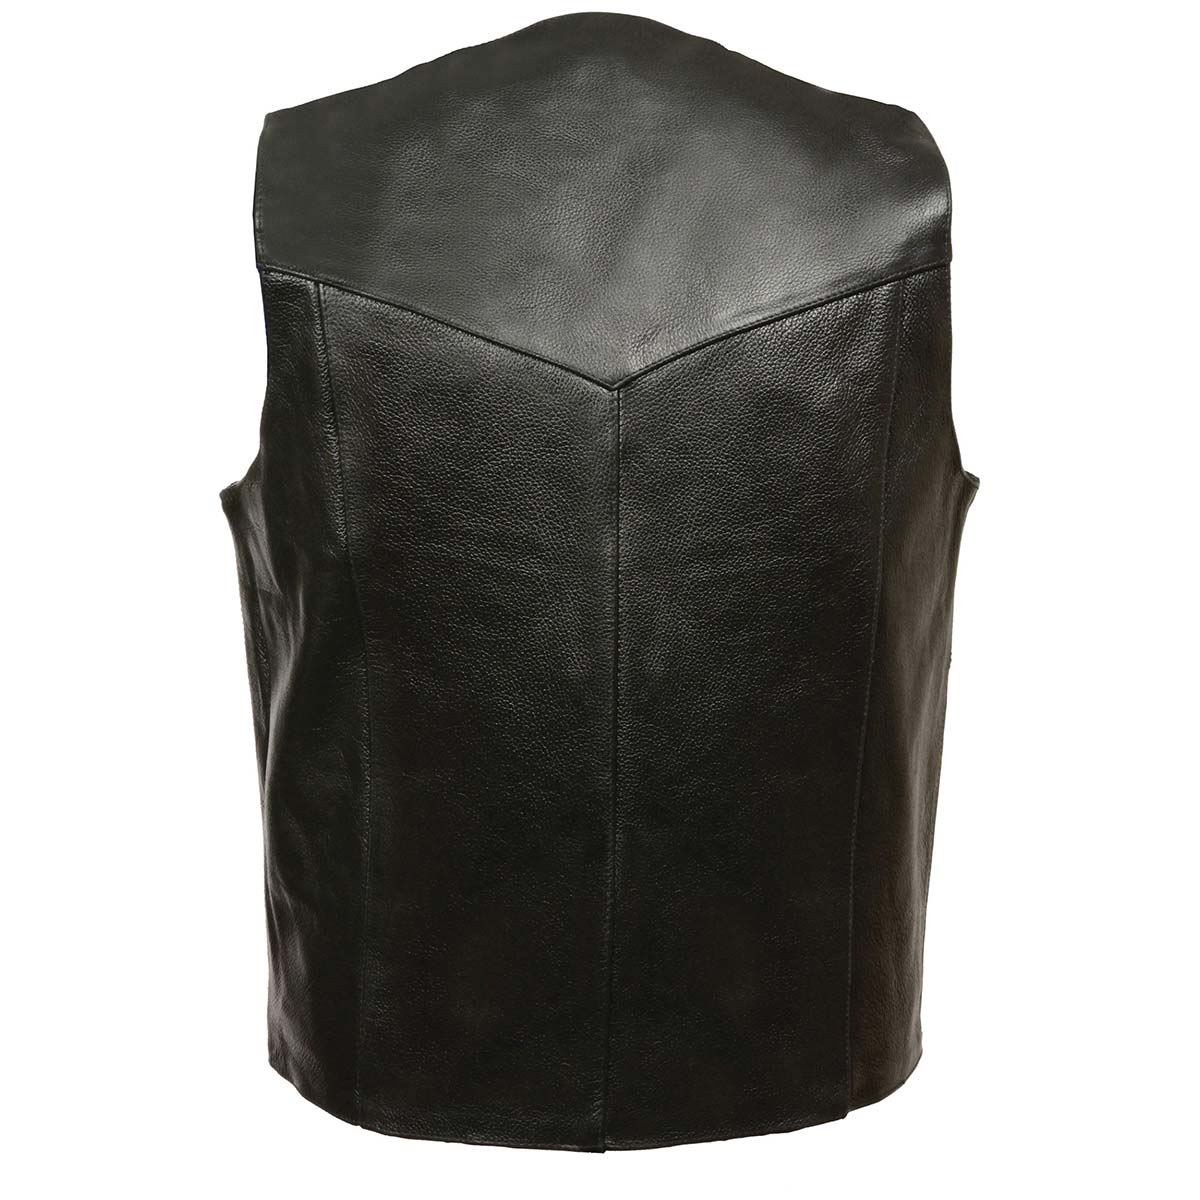 Leather King XS1310LET Men's Classic Black Leather Vest with Snap Button Closure